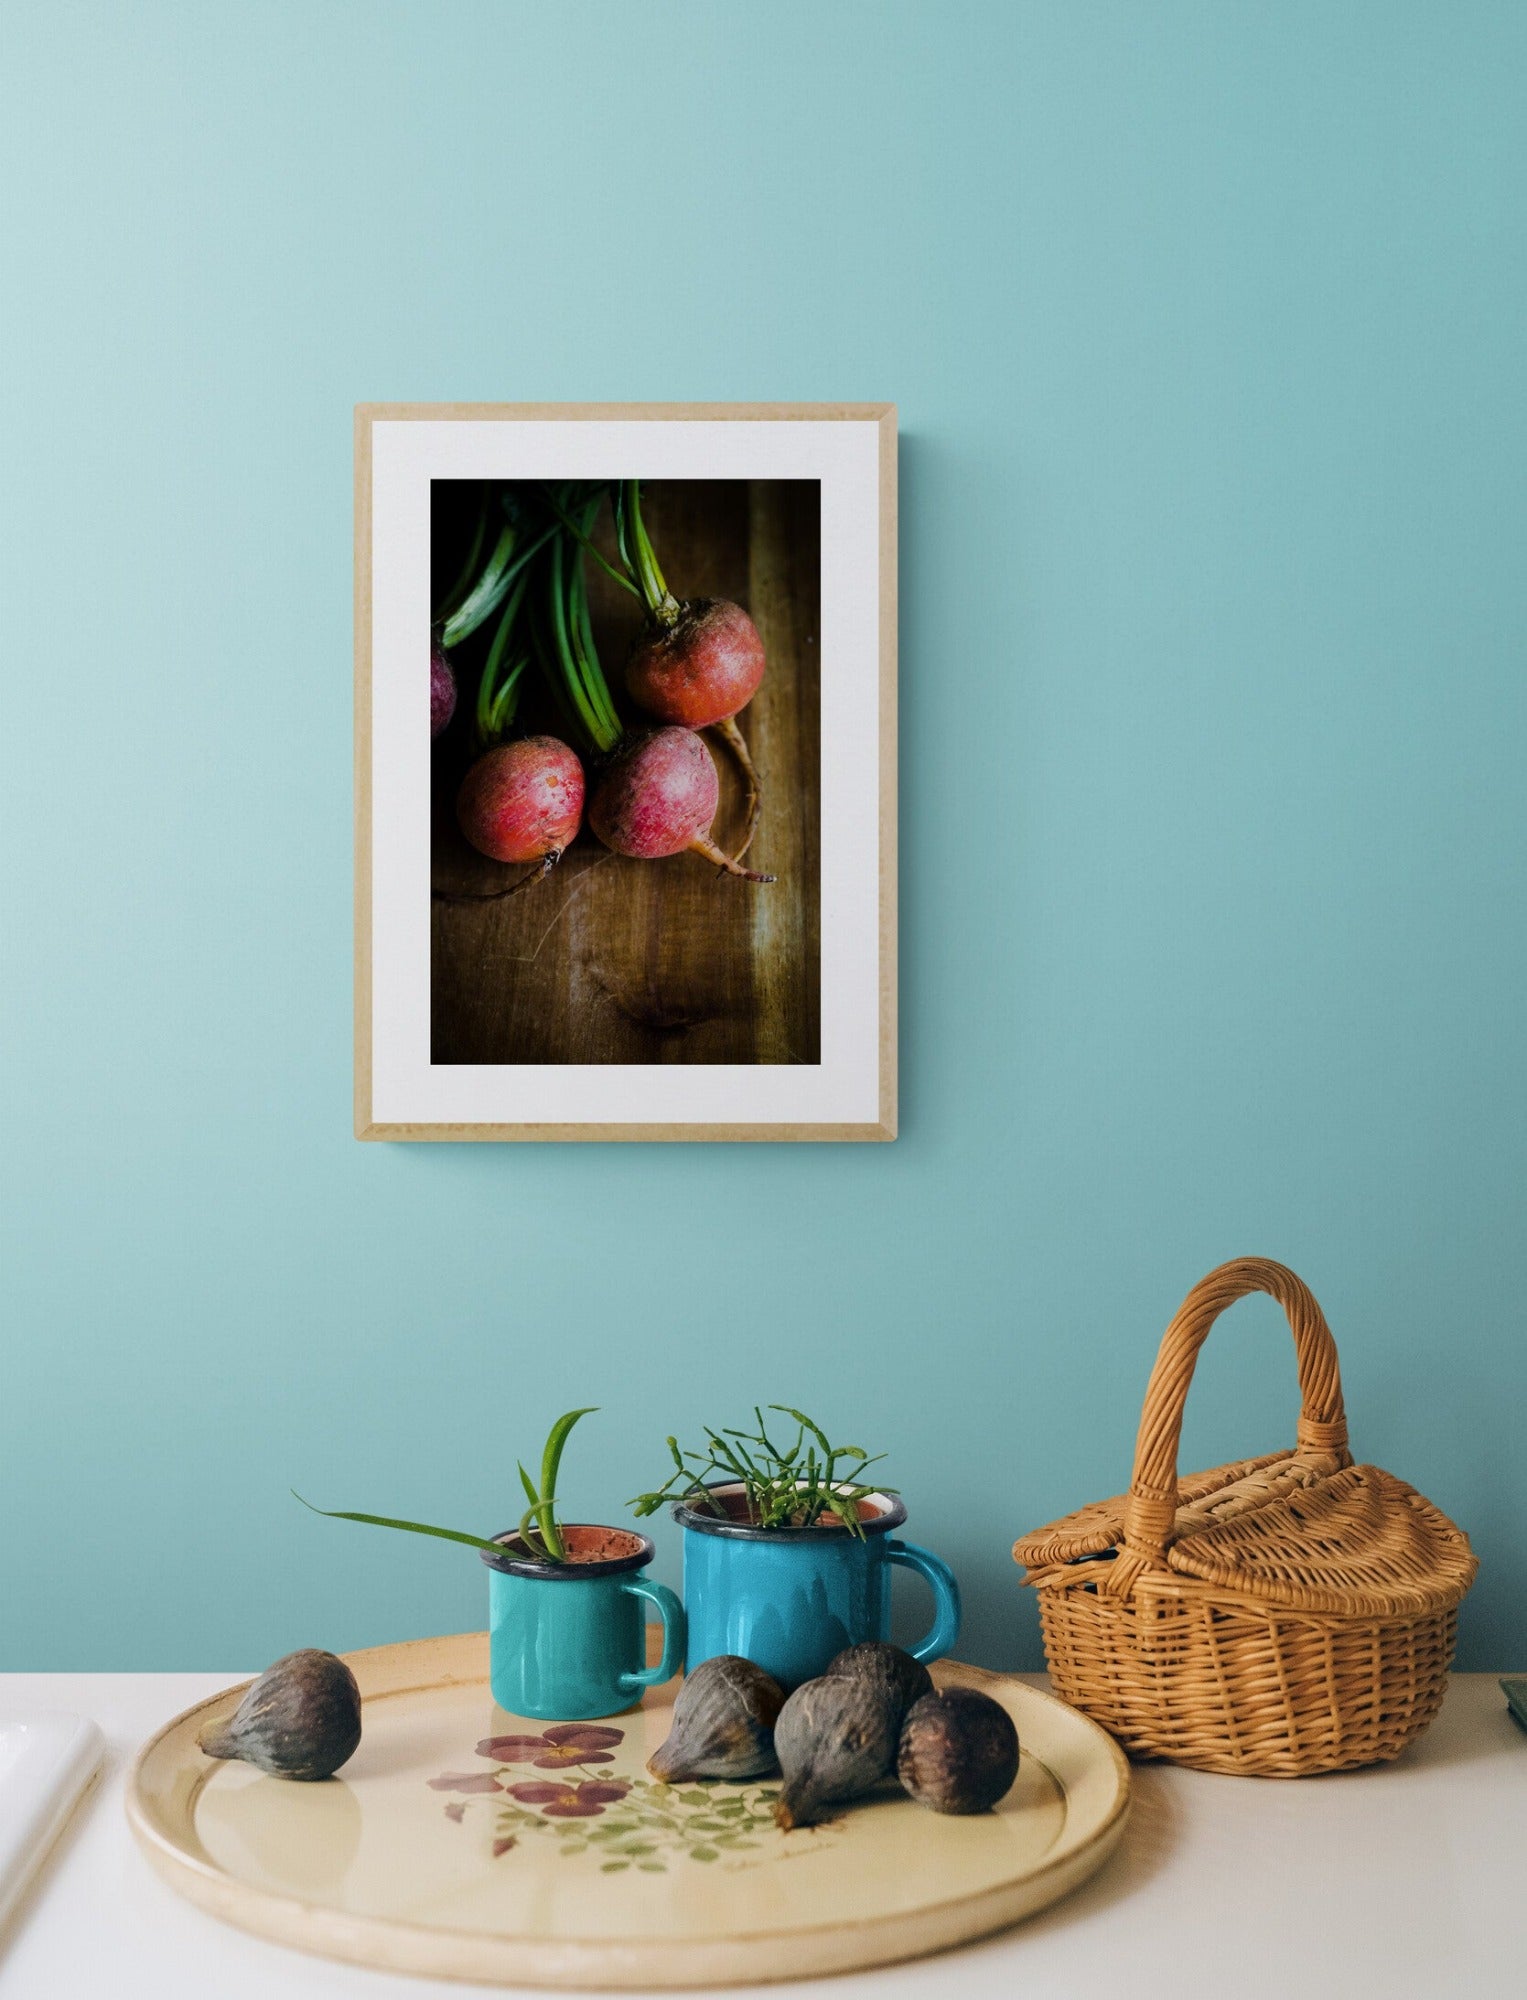 beets photograph print in rustic style on a kitchen counter as wall art